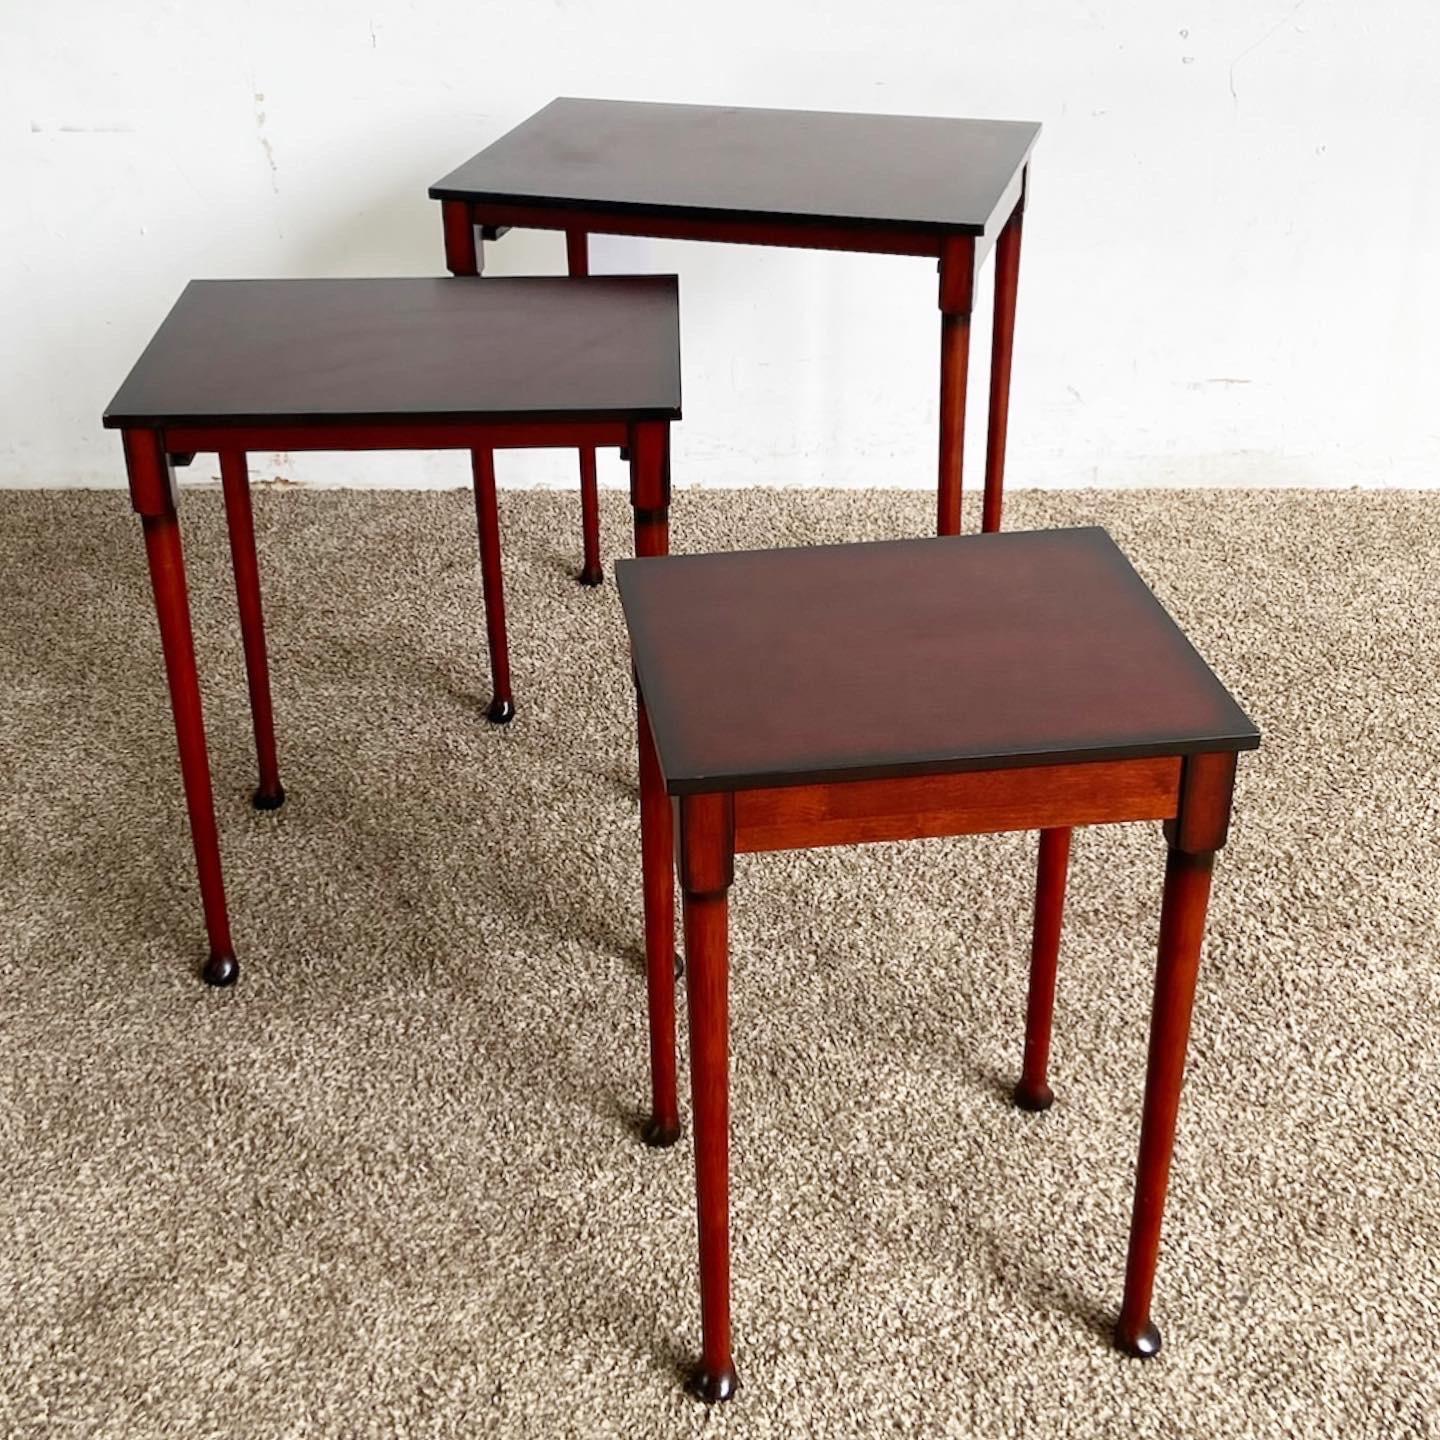 Experience elegance with our set of 3 Traditional Mahogany Nesting Tables from Bombay Company. Combining vintage luxury, versatility, and convenience.

Meticulously crafted from premium mahogany wood.
Timeless rich hue adds warmth to any